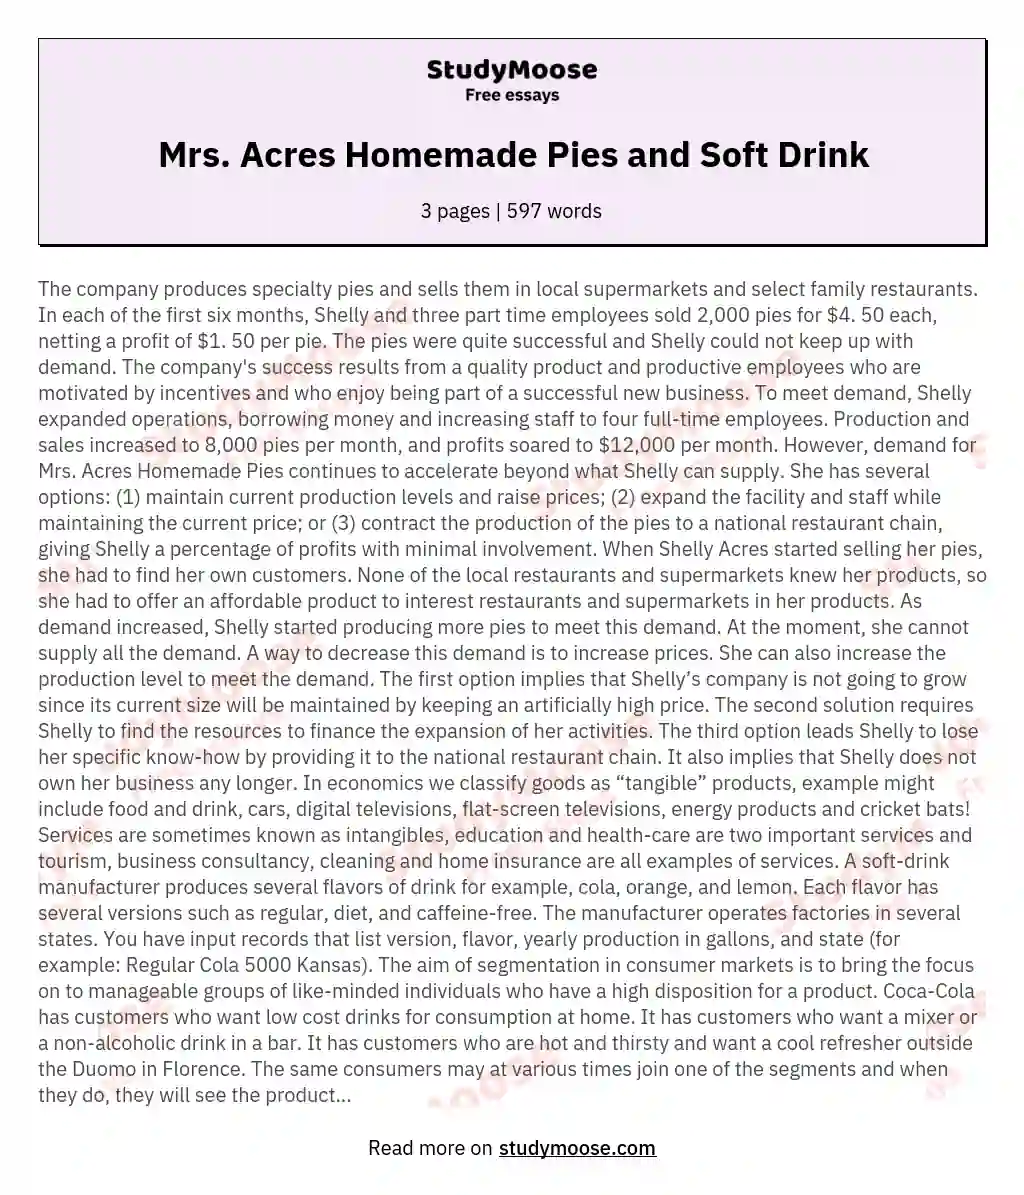 Mrs. Acres Homemade Pies and Soft Drink essay